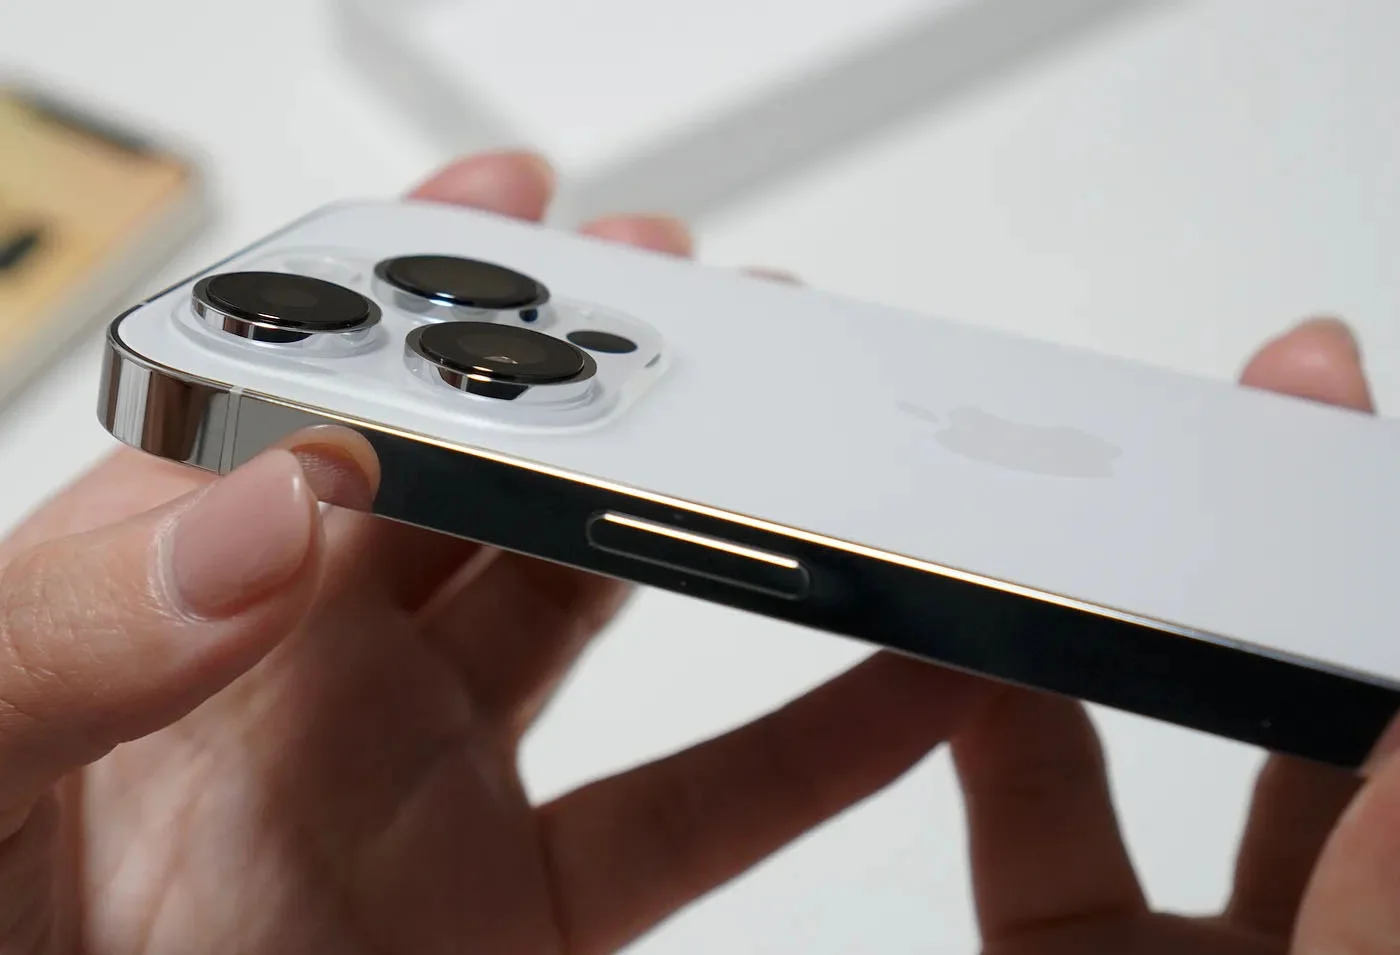 Insiders: iPhone 15 Pro will not have touch keys